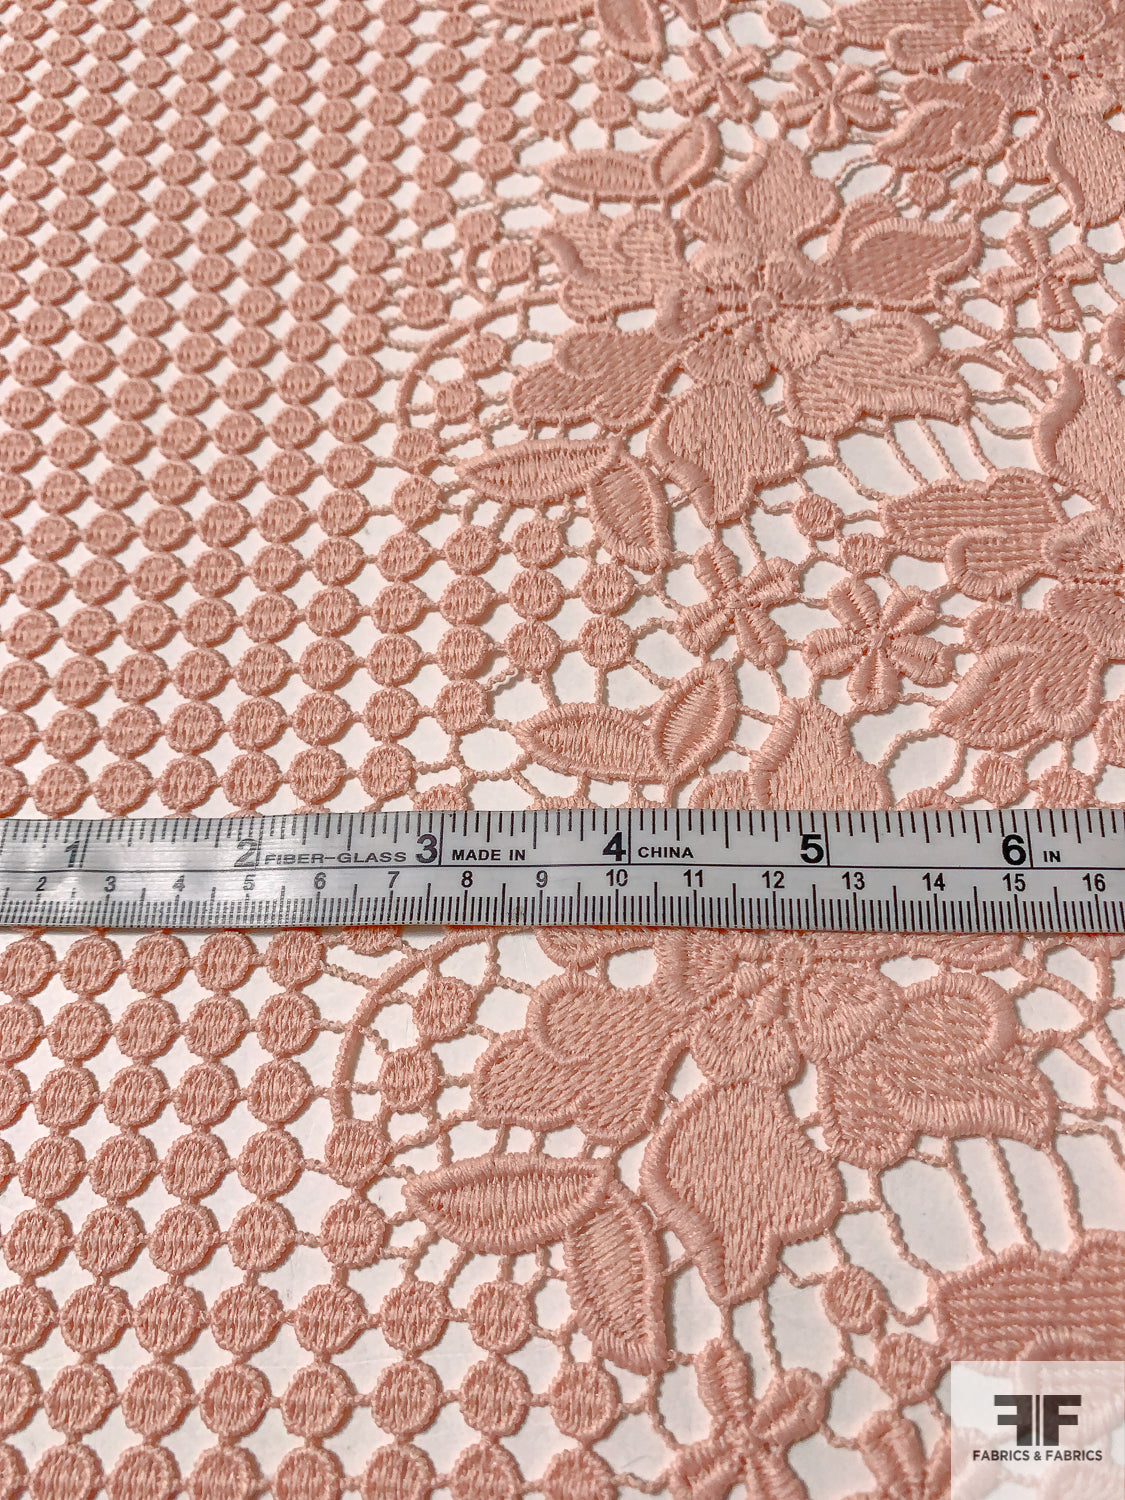 Circle Grid and Floral Border Pattern Guipure Lace - Blush Peach